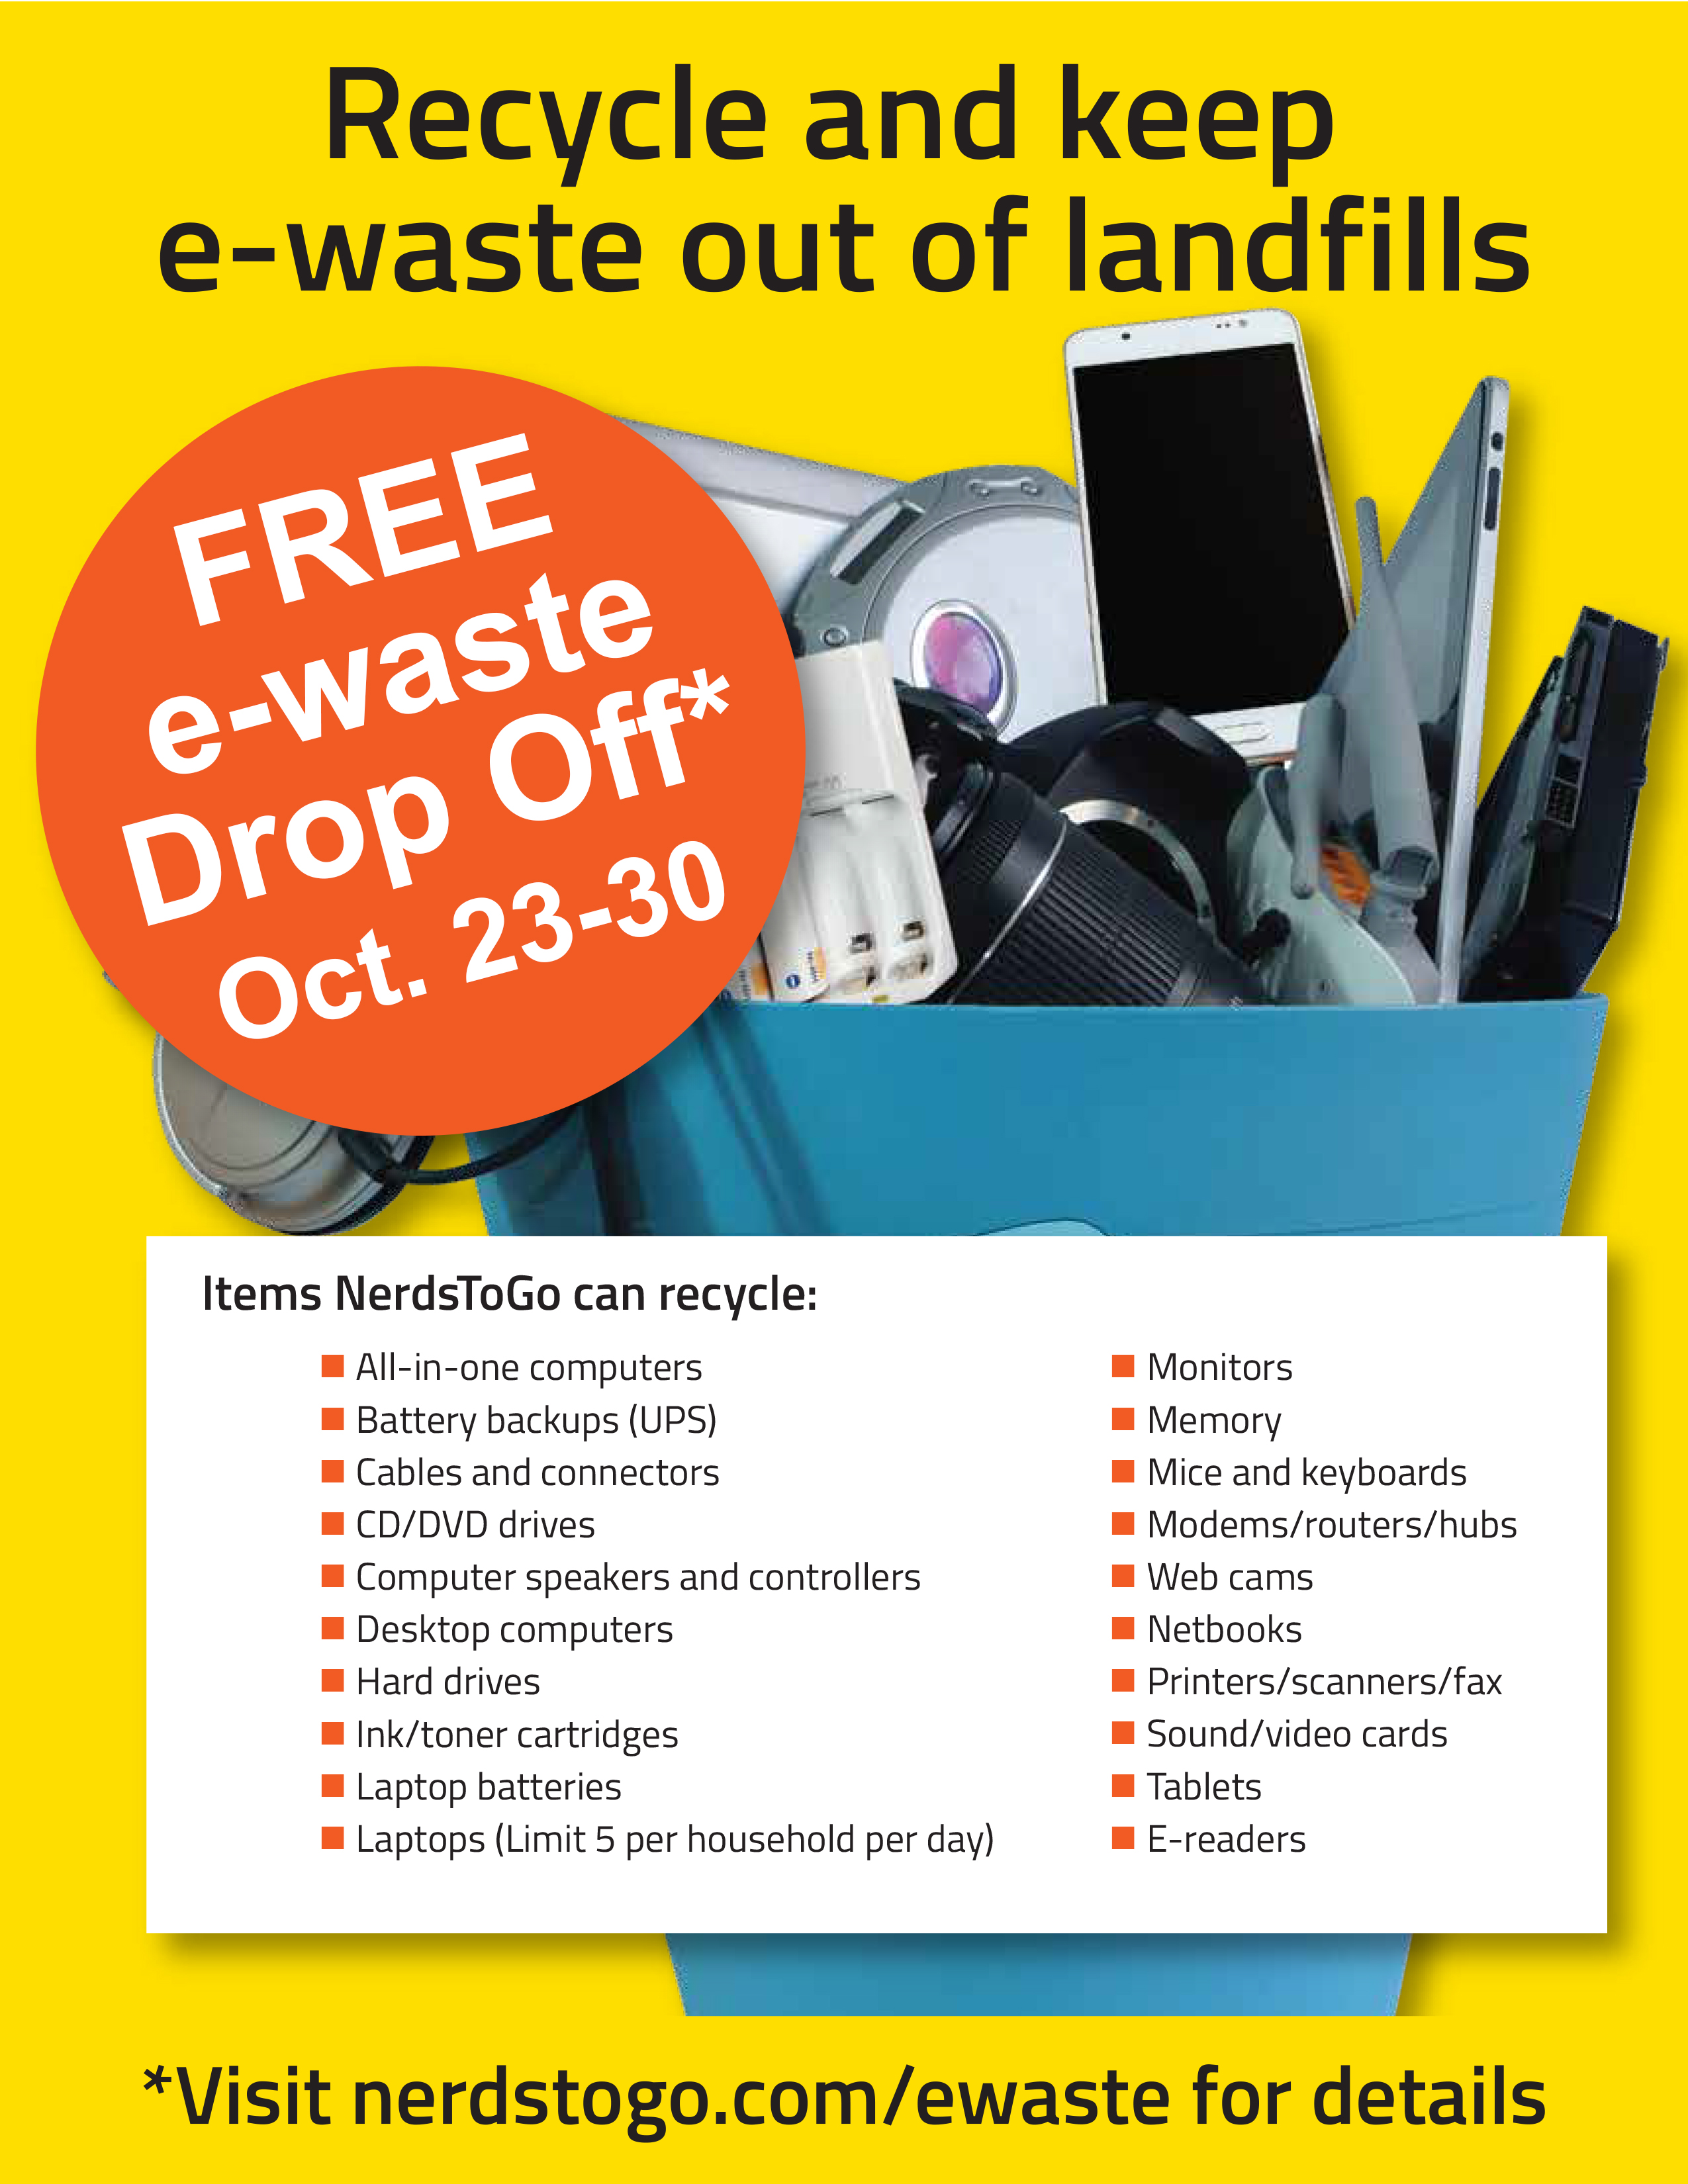 e-waste drop off event flyer